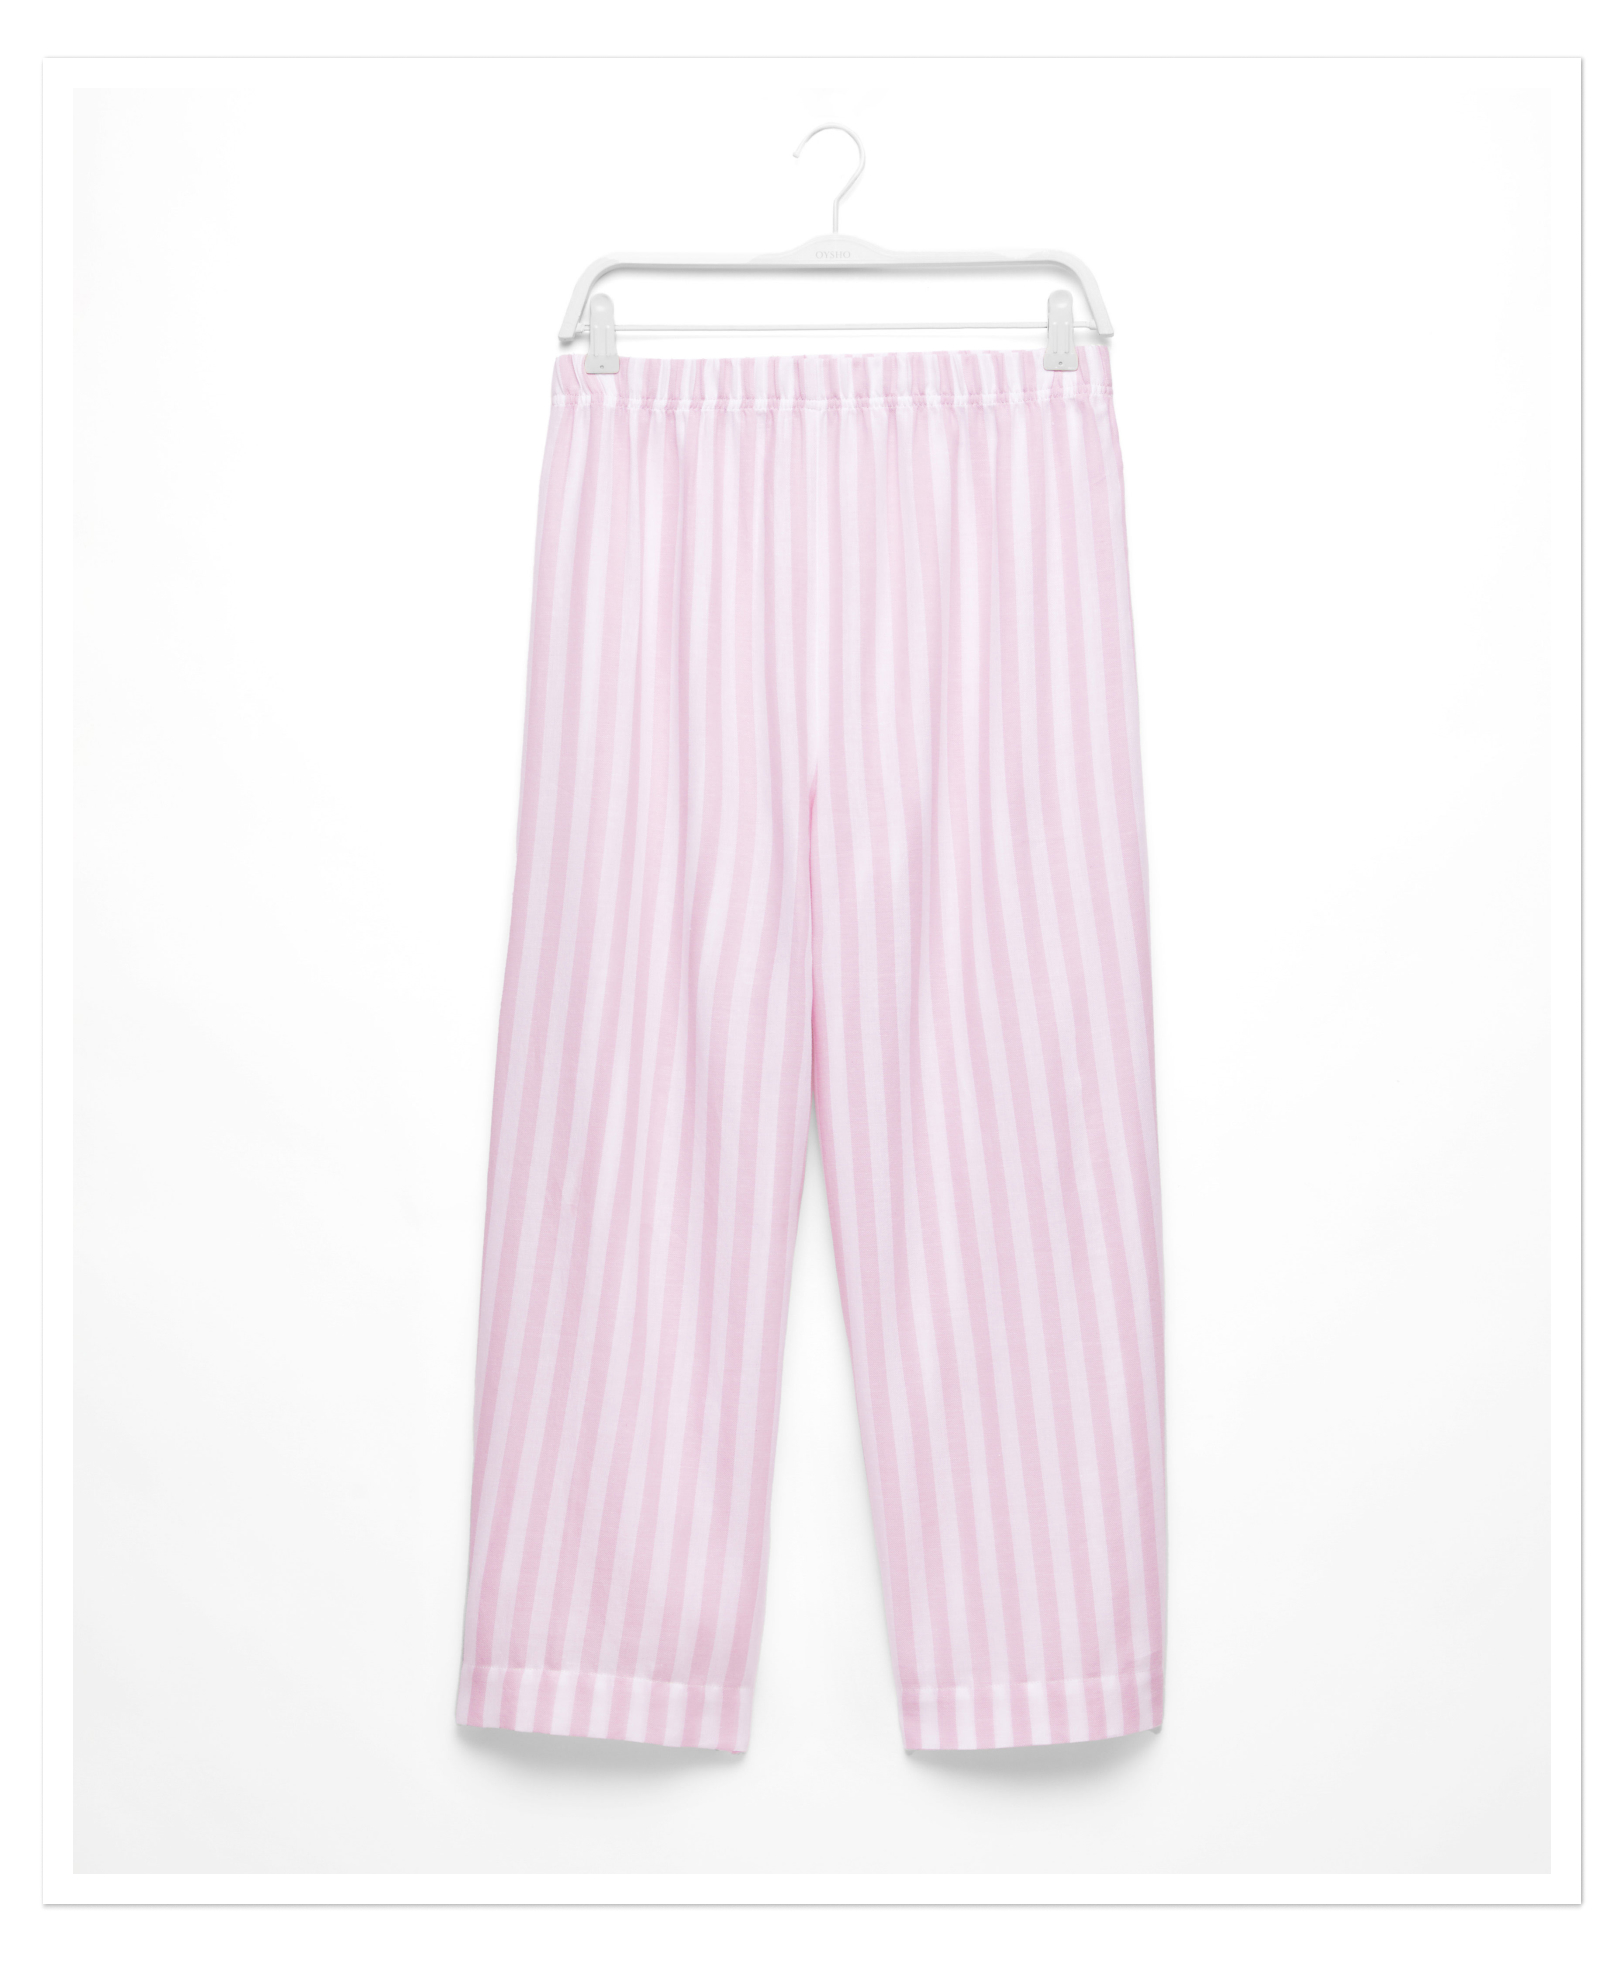 Striped 100% cotton trousers